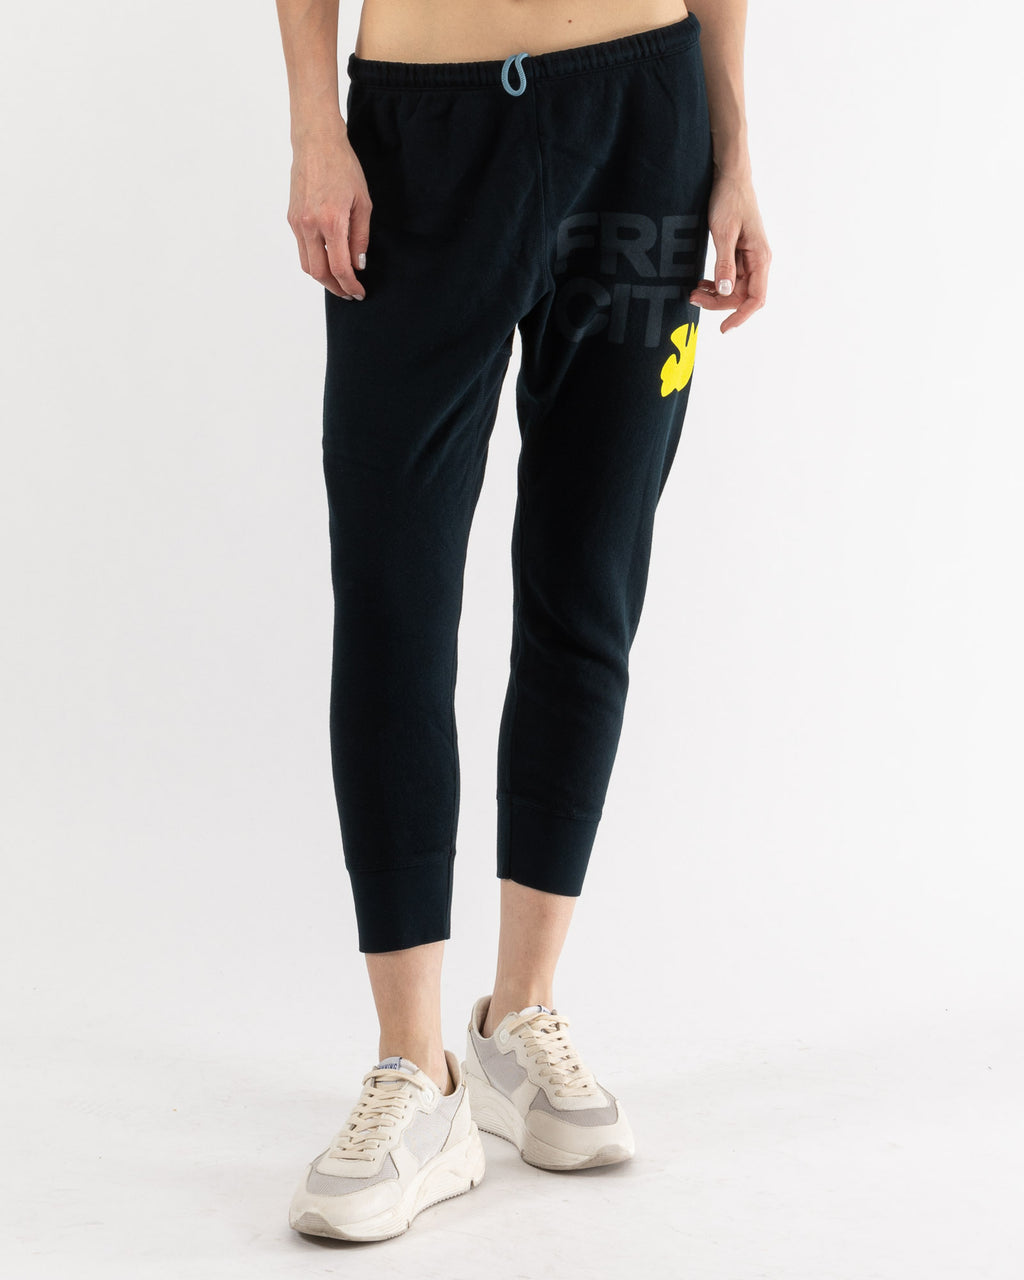 Skinny French Terry Sweatpant Black - Unisex - Made in Canada - Province of  Canada